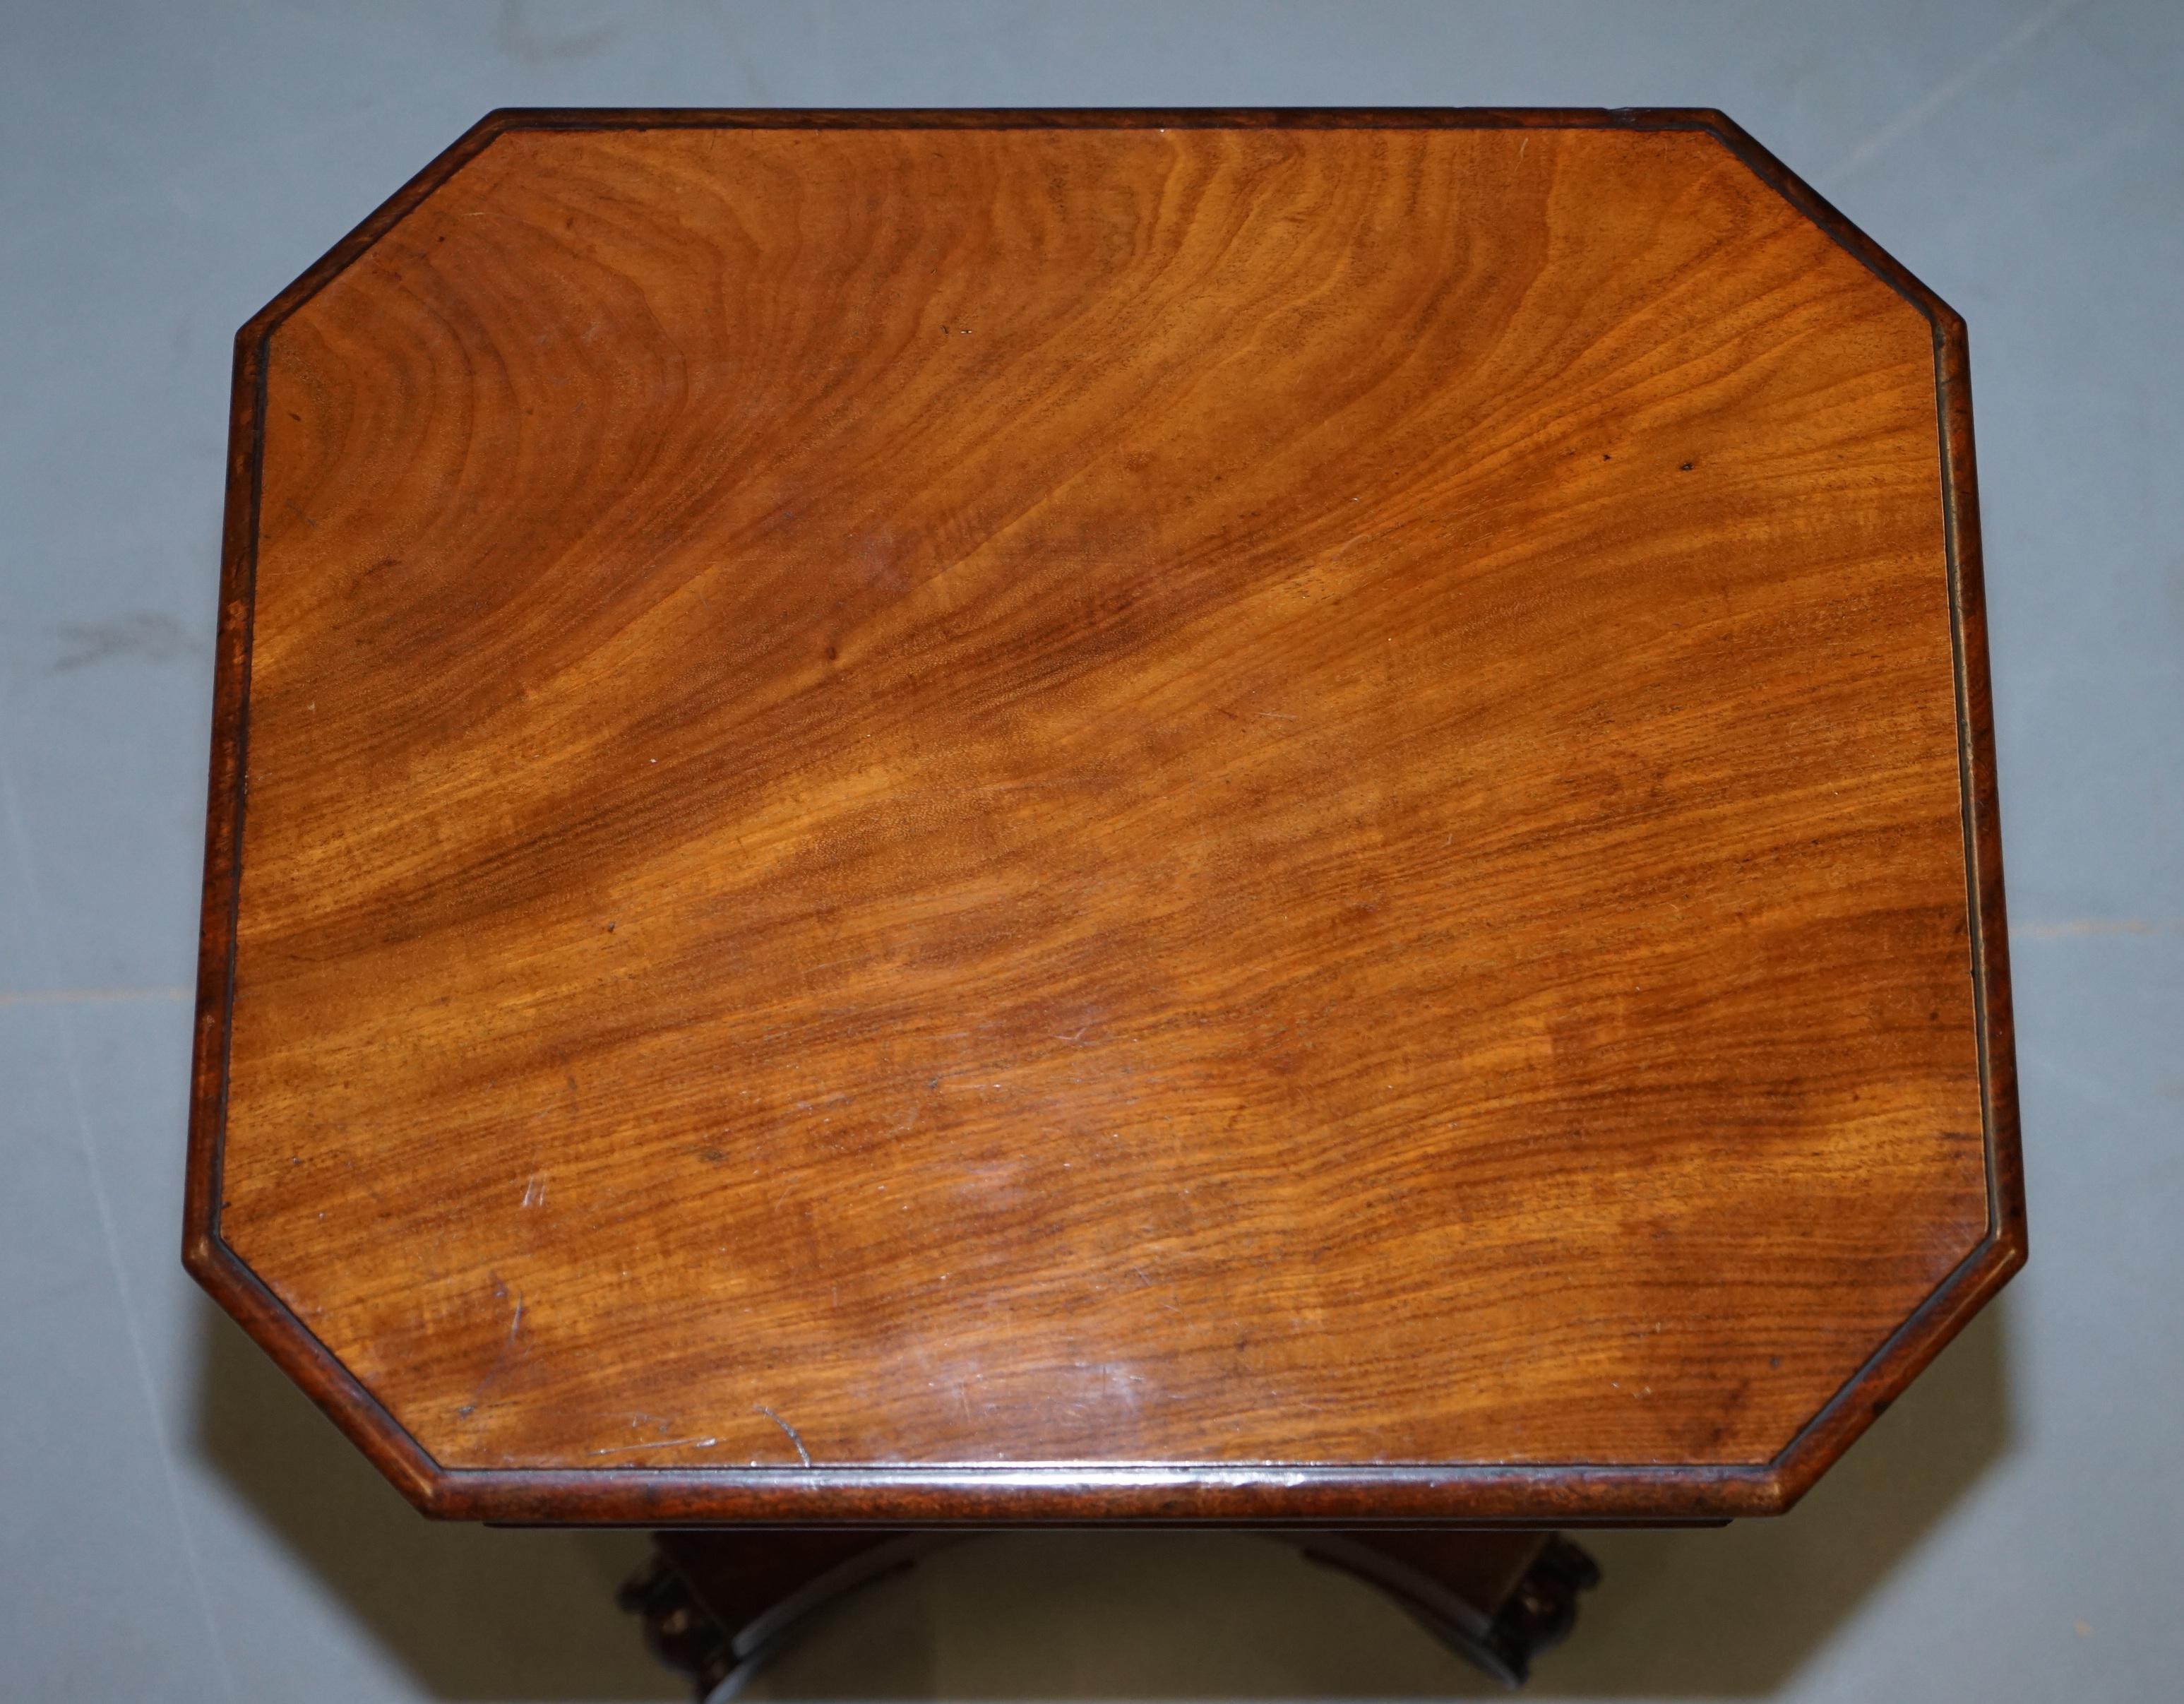 English Sublime Antique William IV circa 1830 Flamed Hardwood Single Drawer Side Table For Sale